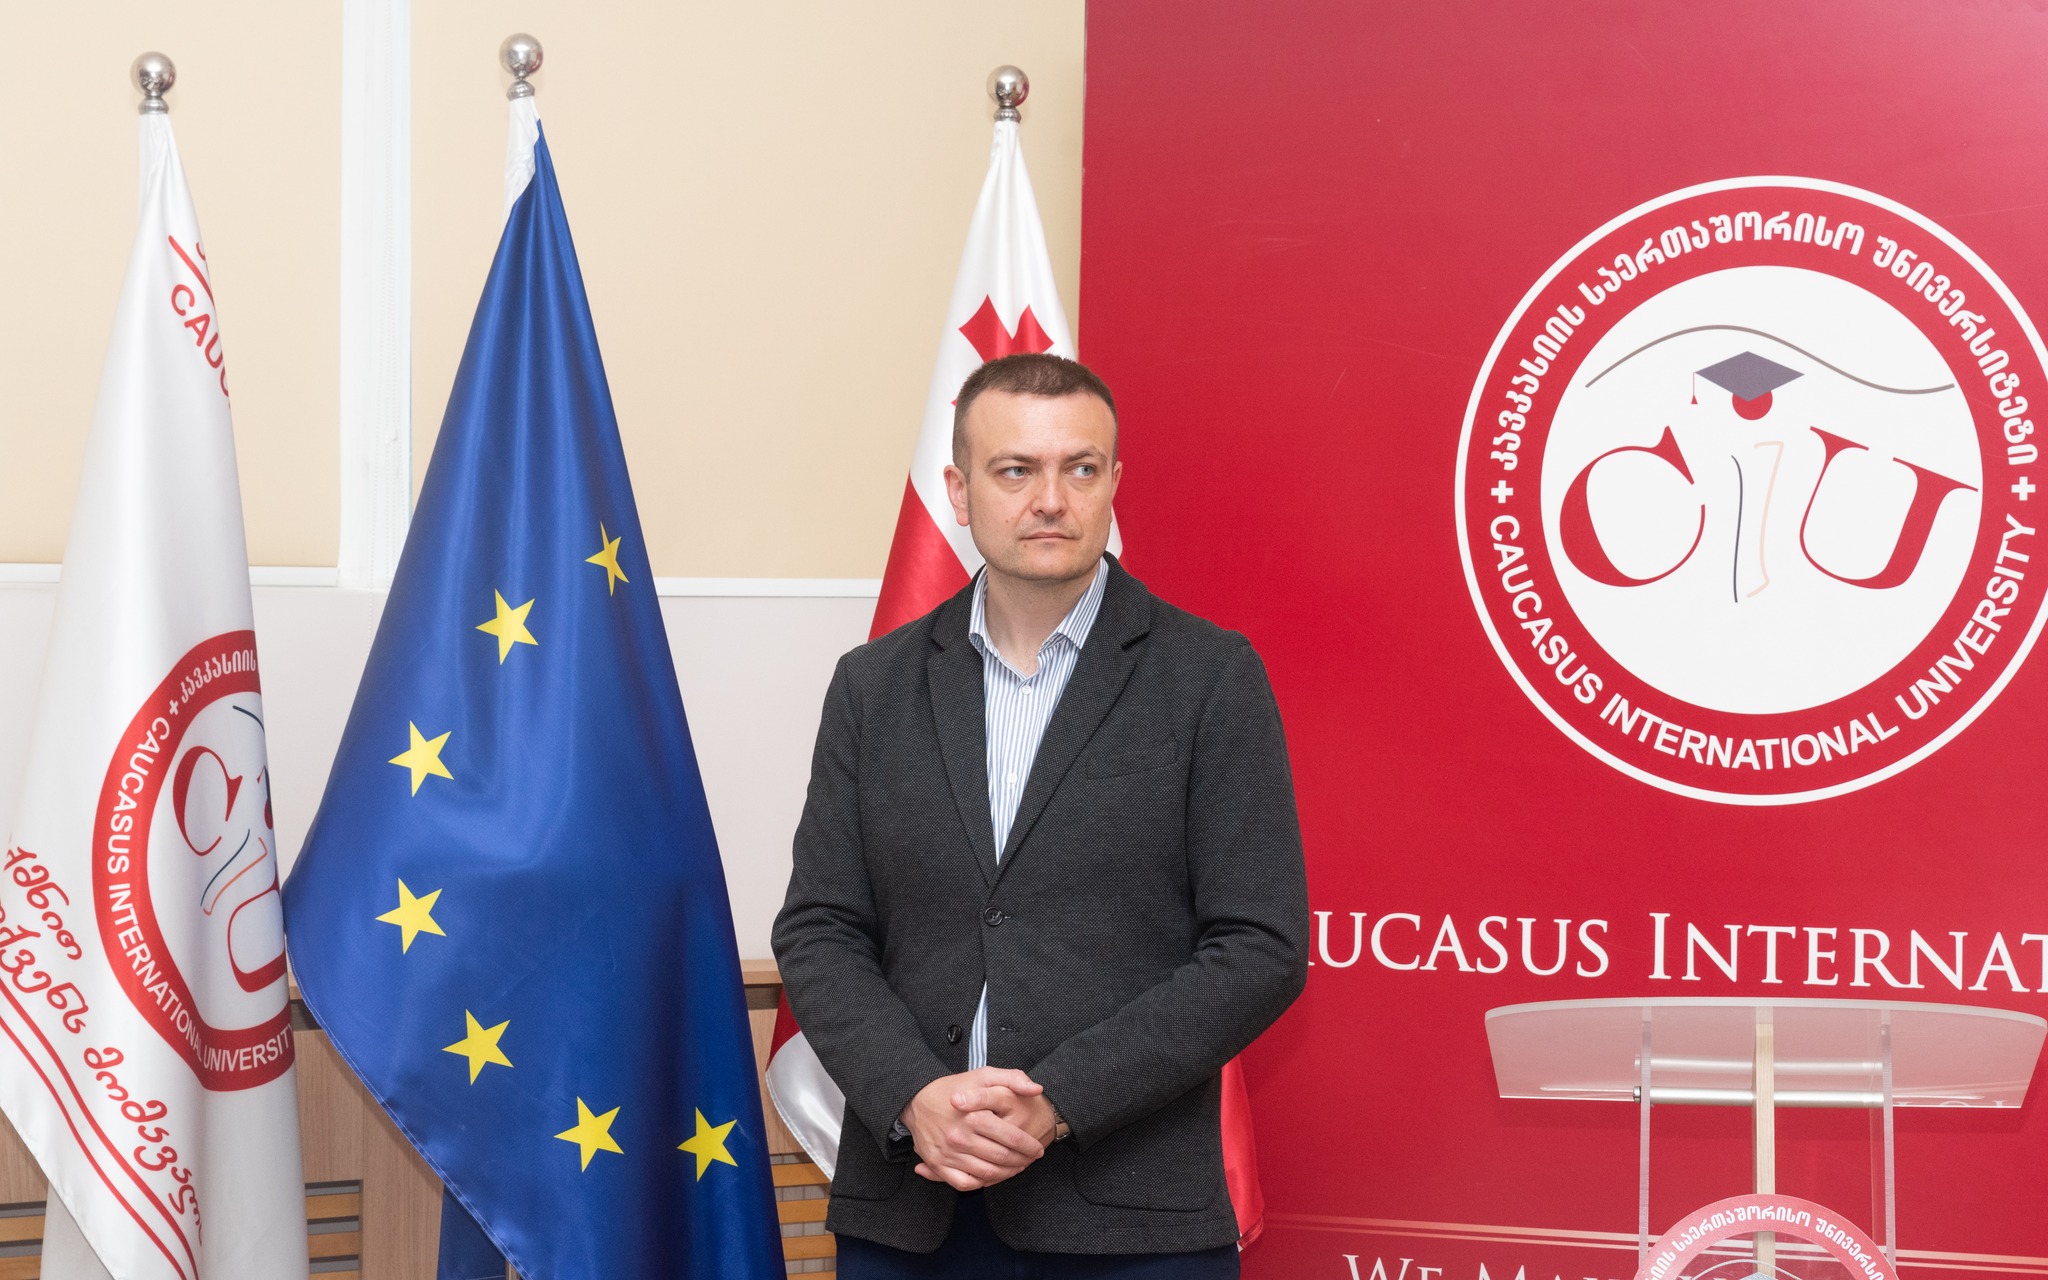 Polish Professor’s Training on Open Science and Research